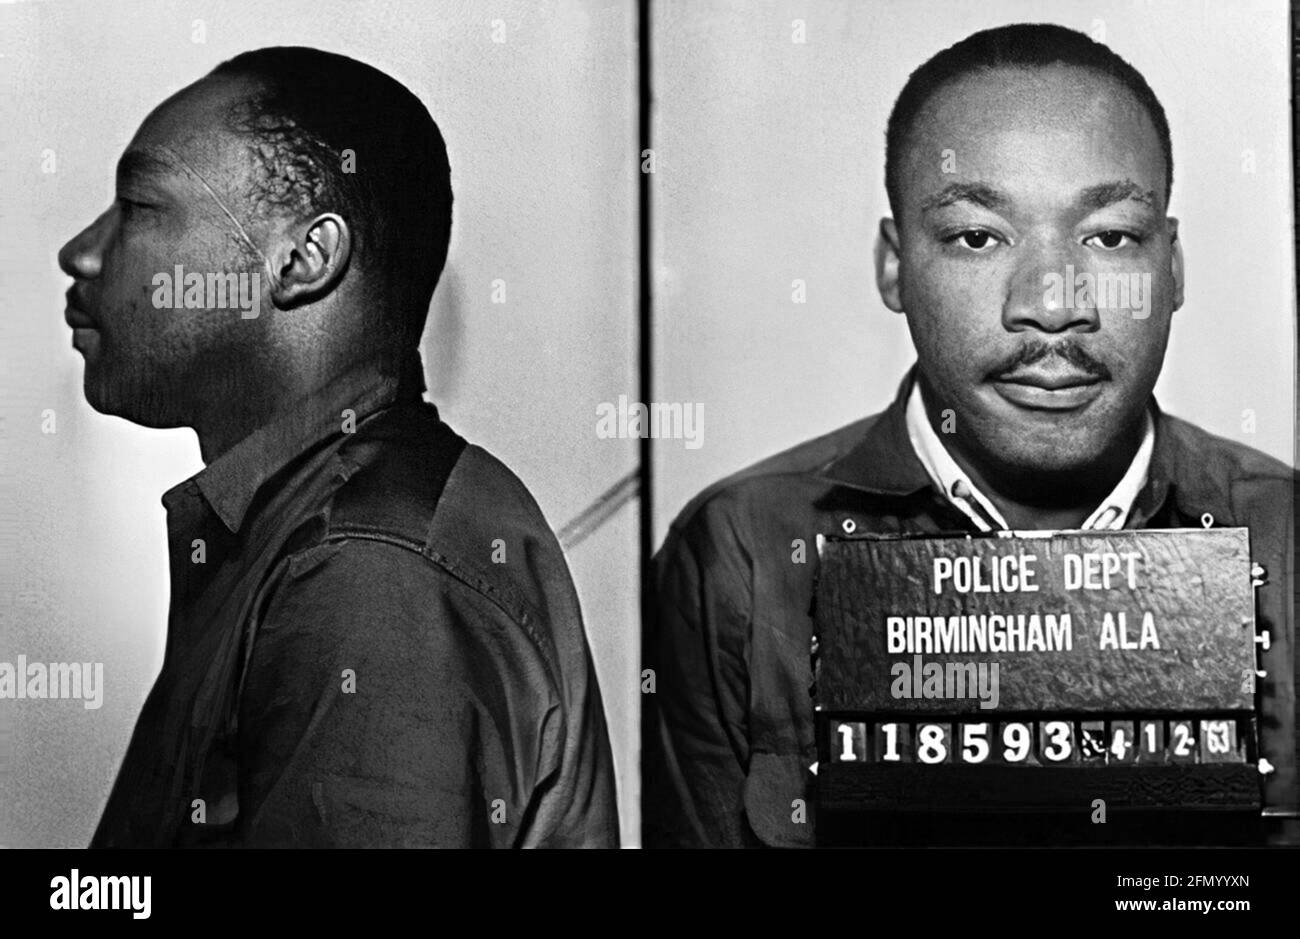 1963 , 12 april , Birmingham , Alabama , USA :  Mugshot of activist in the civil rights movement MARTIN LUTHER KING ( 1929 - 1968 ), taken following his arrest for disorderly conduct . Unknown photographer by Birmingham Police Department . - FOTO SEGNALETICA - portrait - ritratto - DIRITTI CIVILI - CIVIL RIGHTS - AFROAMERICANI - AFROAMERICANS - Afro Americani - Afro americans - ATTIVISTA - abolizione separazionismo apartaid  --- Archivio GBB Stock Photo